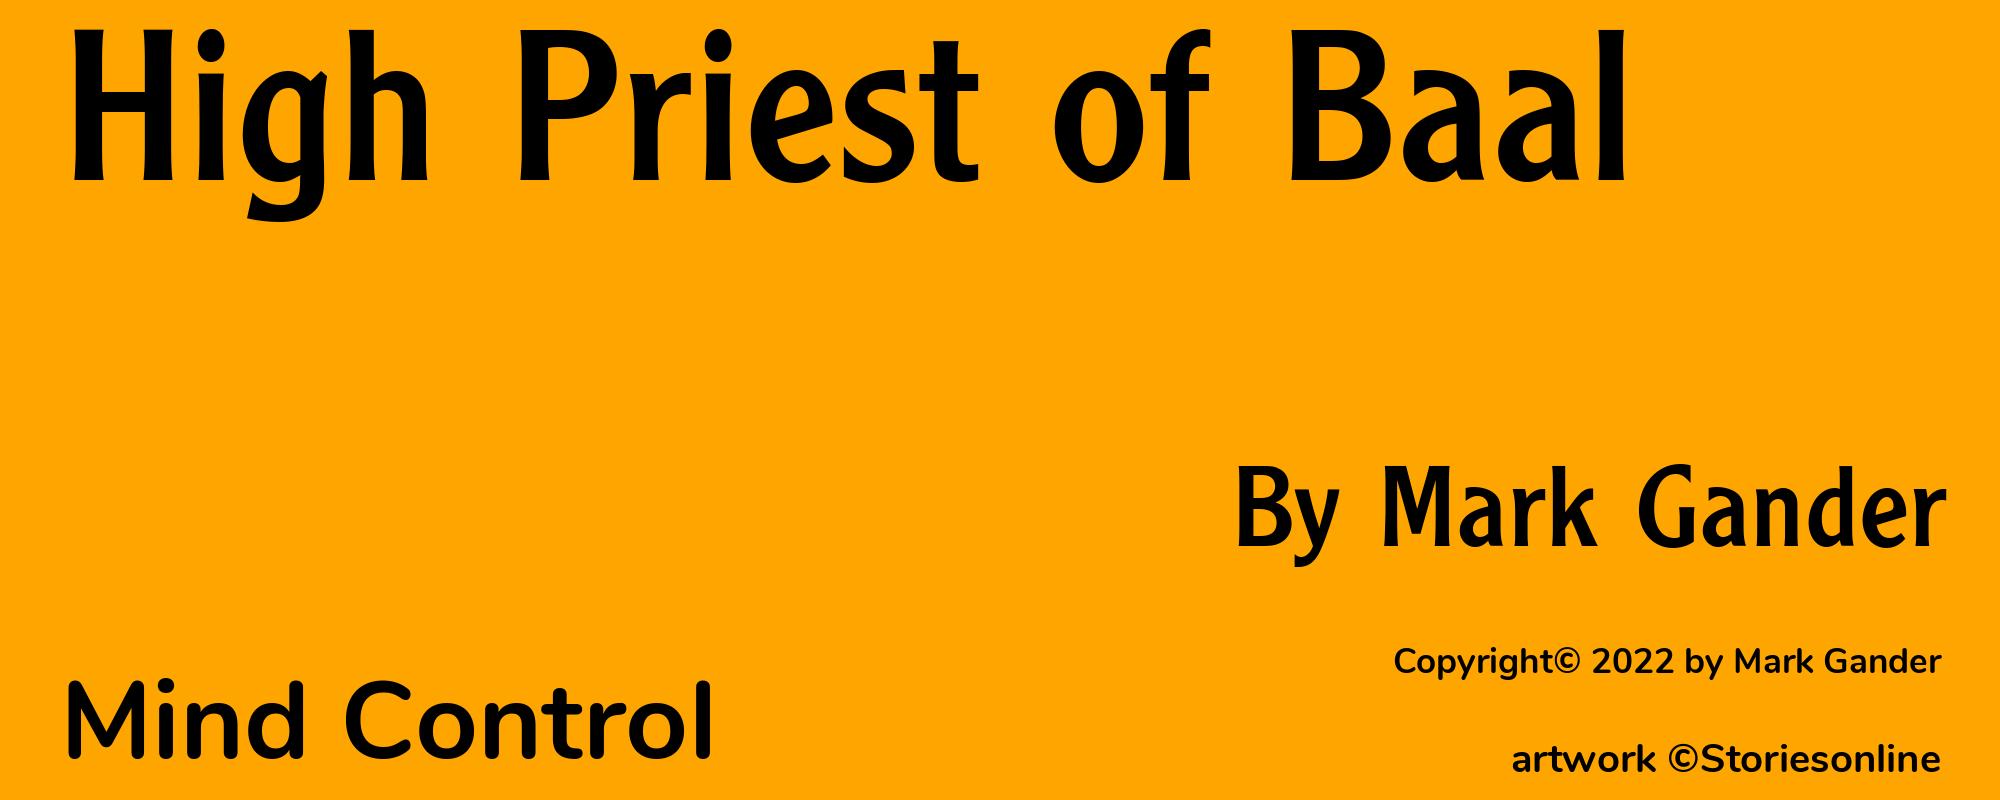 High Priest of Baal - Cover